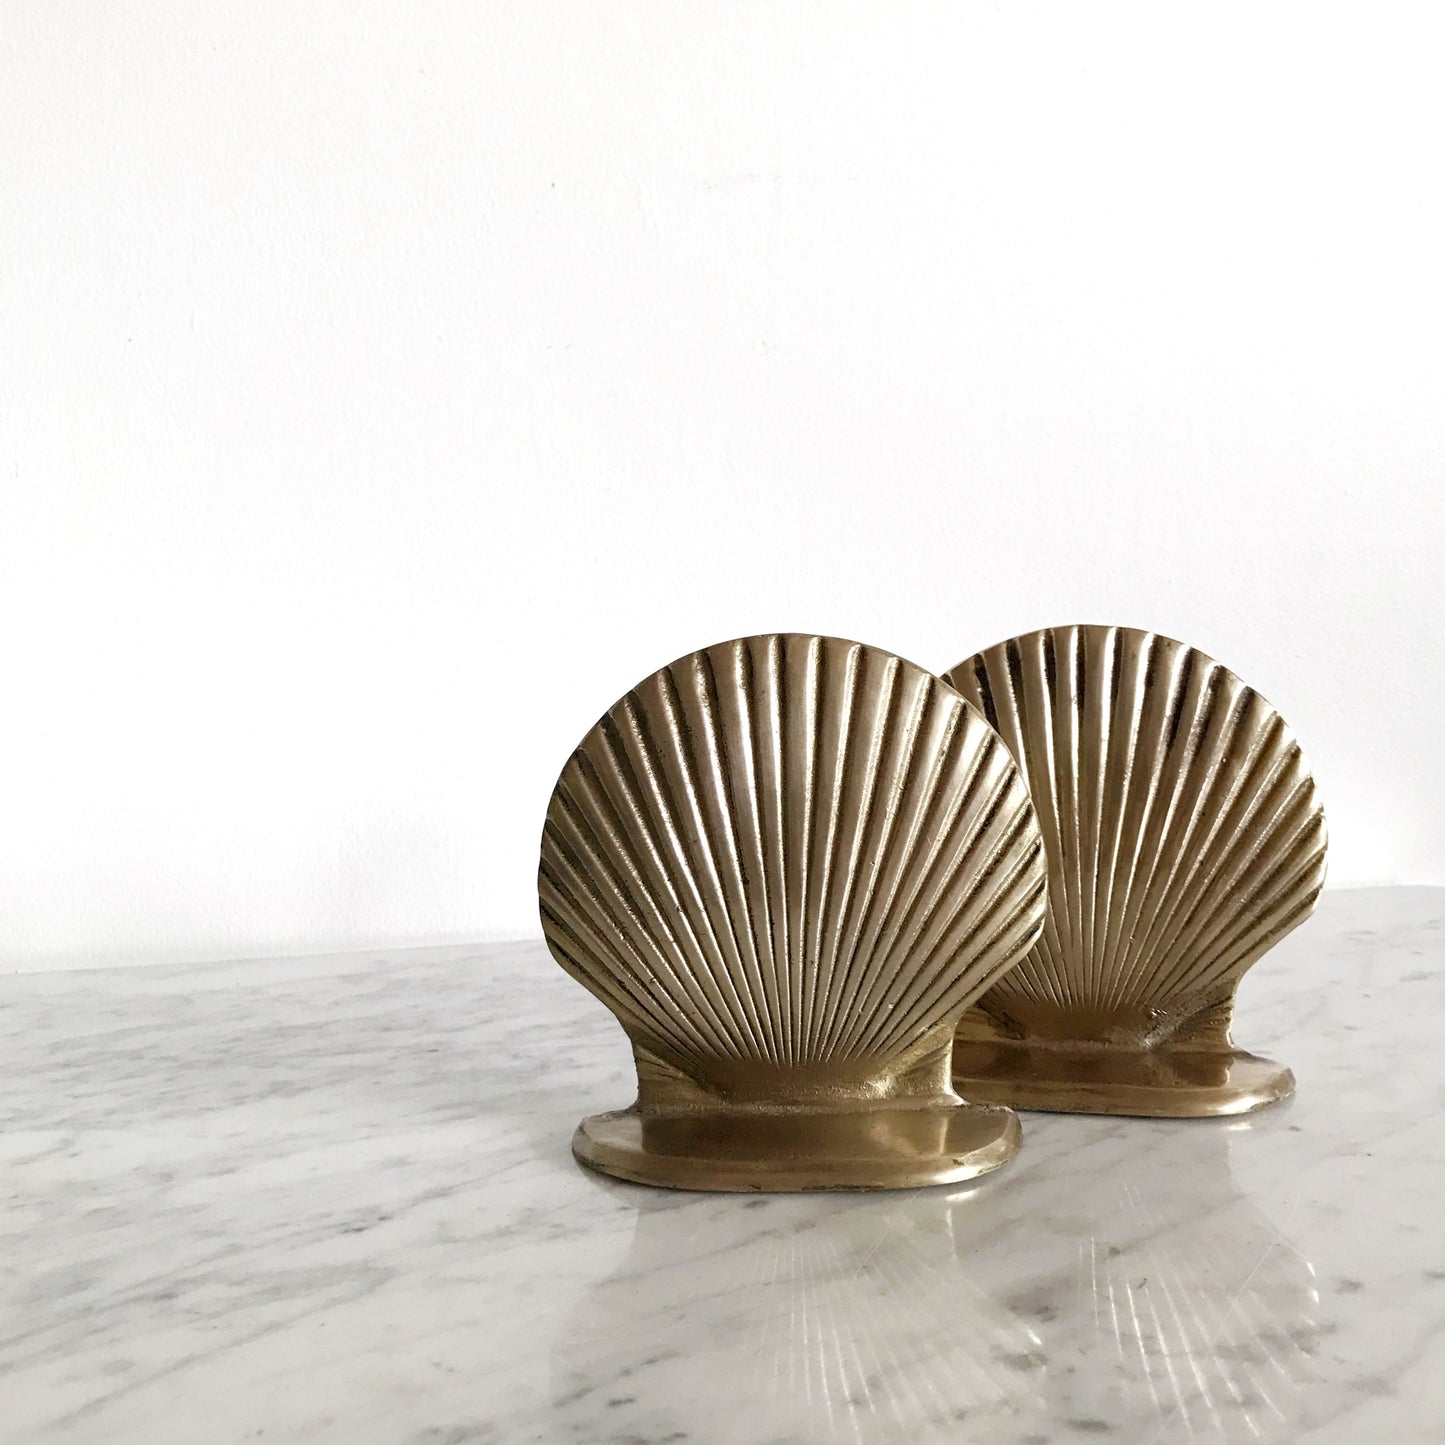 Pair of Vintage Brass Seashell Bookends